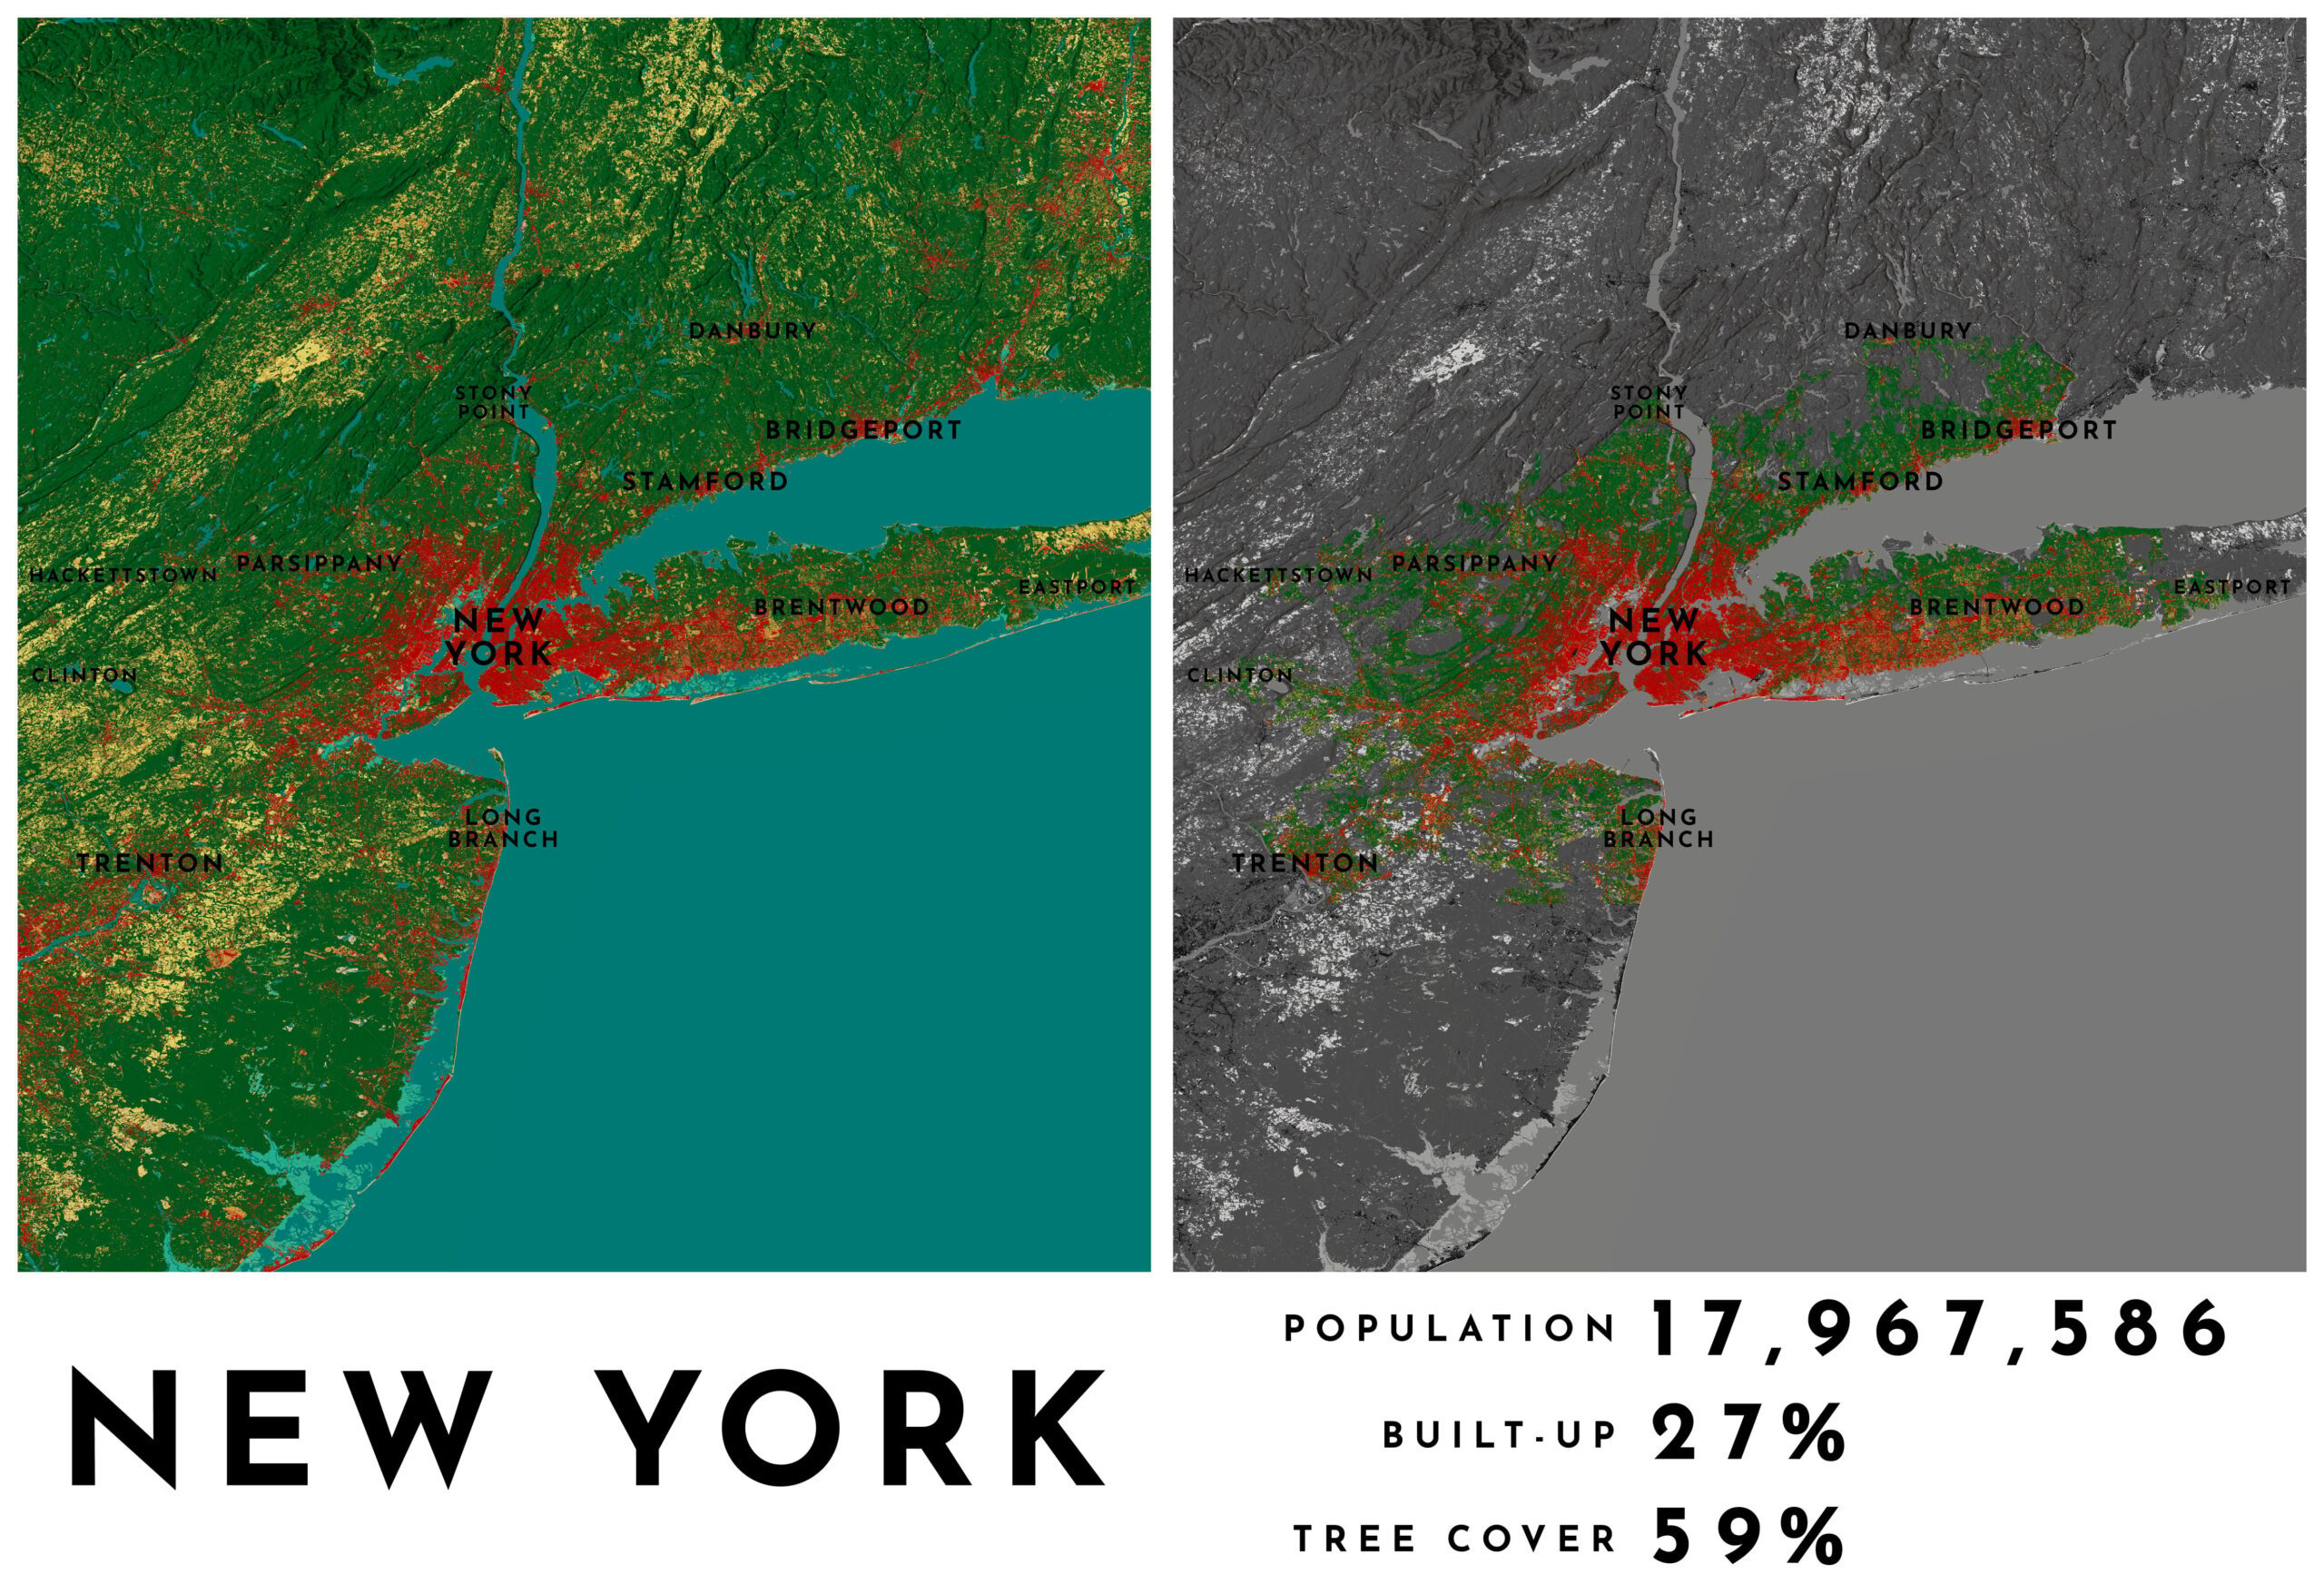 Map showing the city with results of population, built-up, and tree cover.